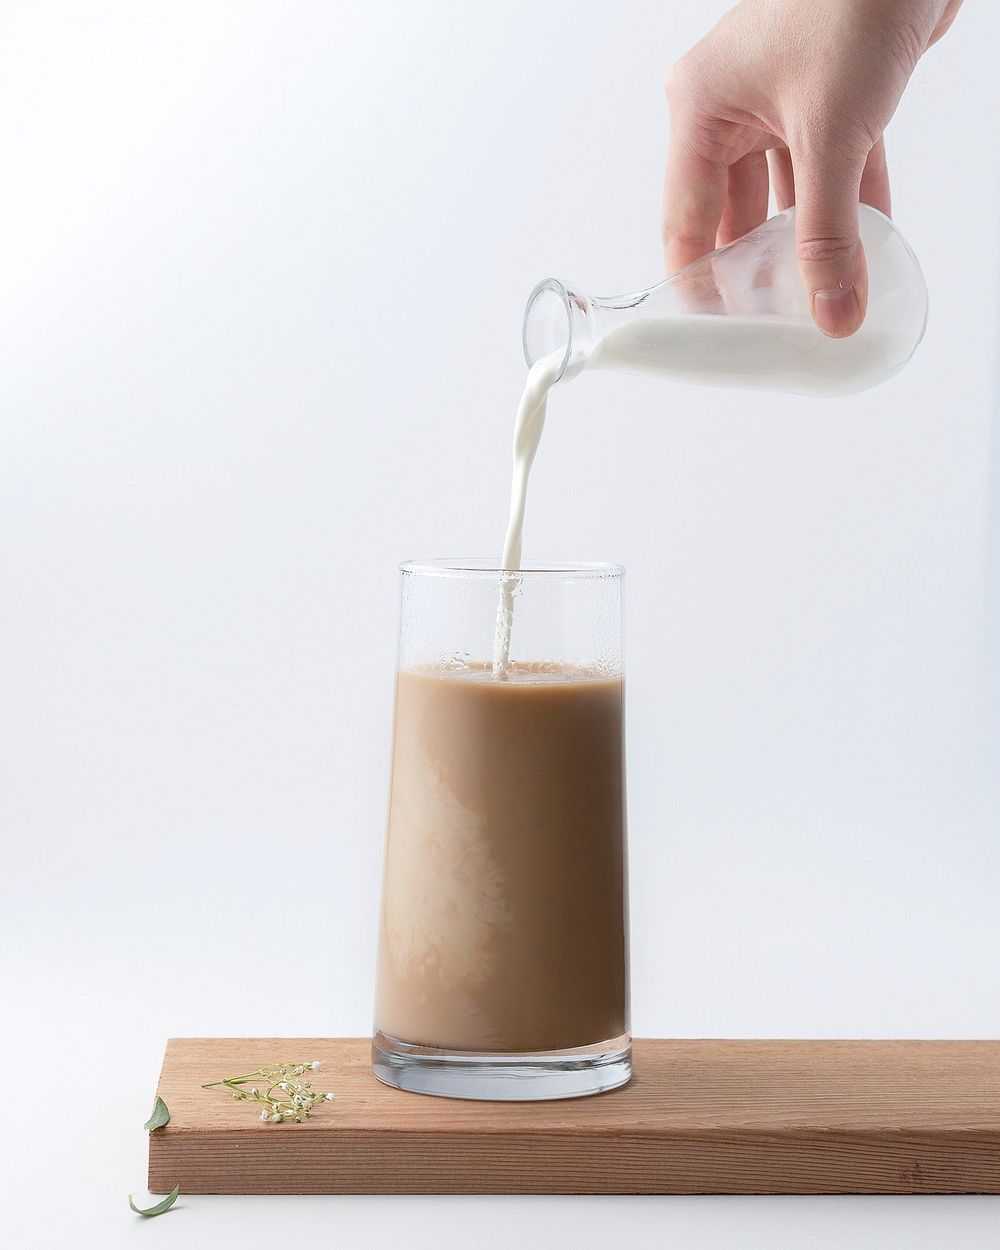 Free pouring milk into coffee glass with white background photo, public domain beverage CC0 image.